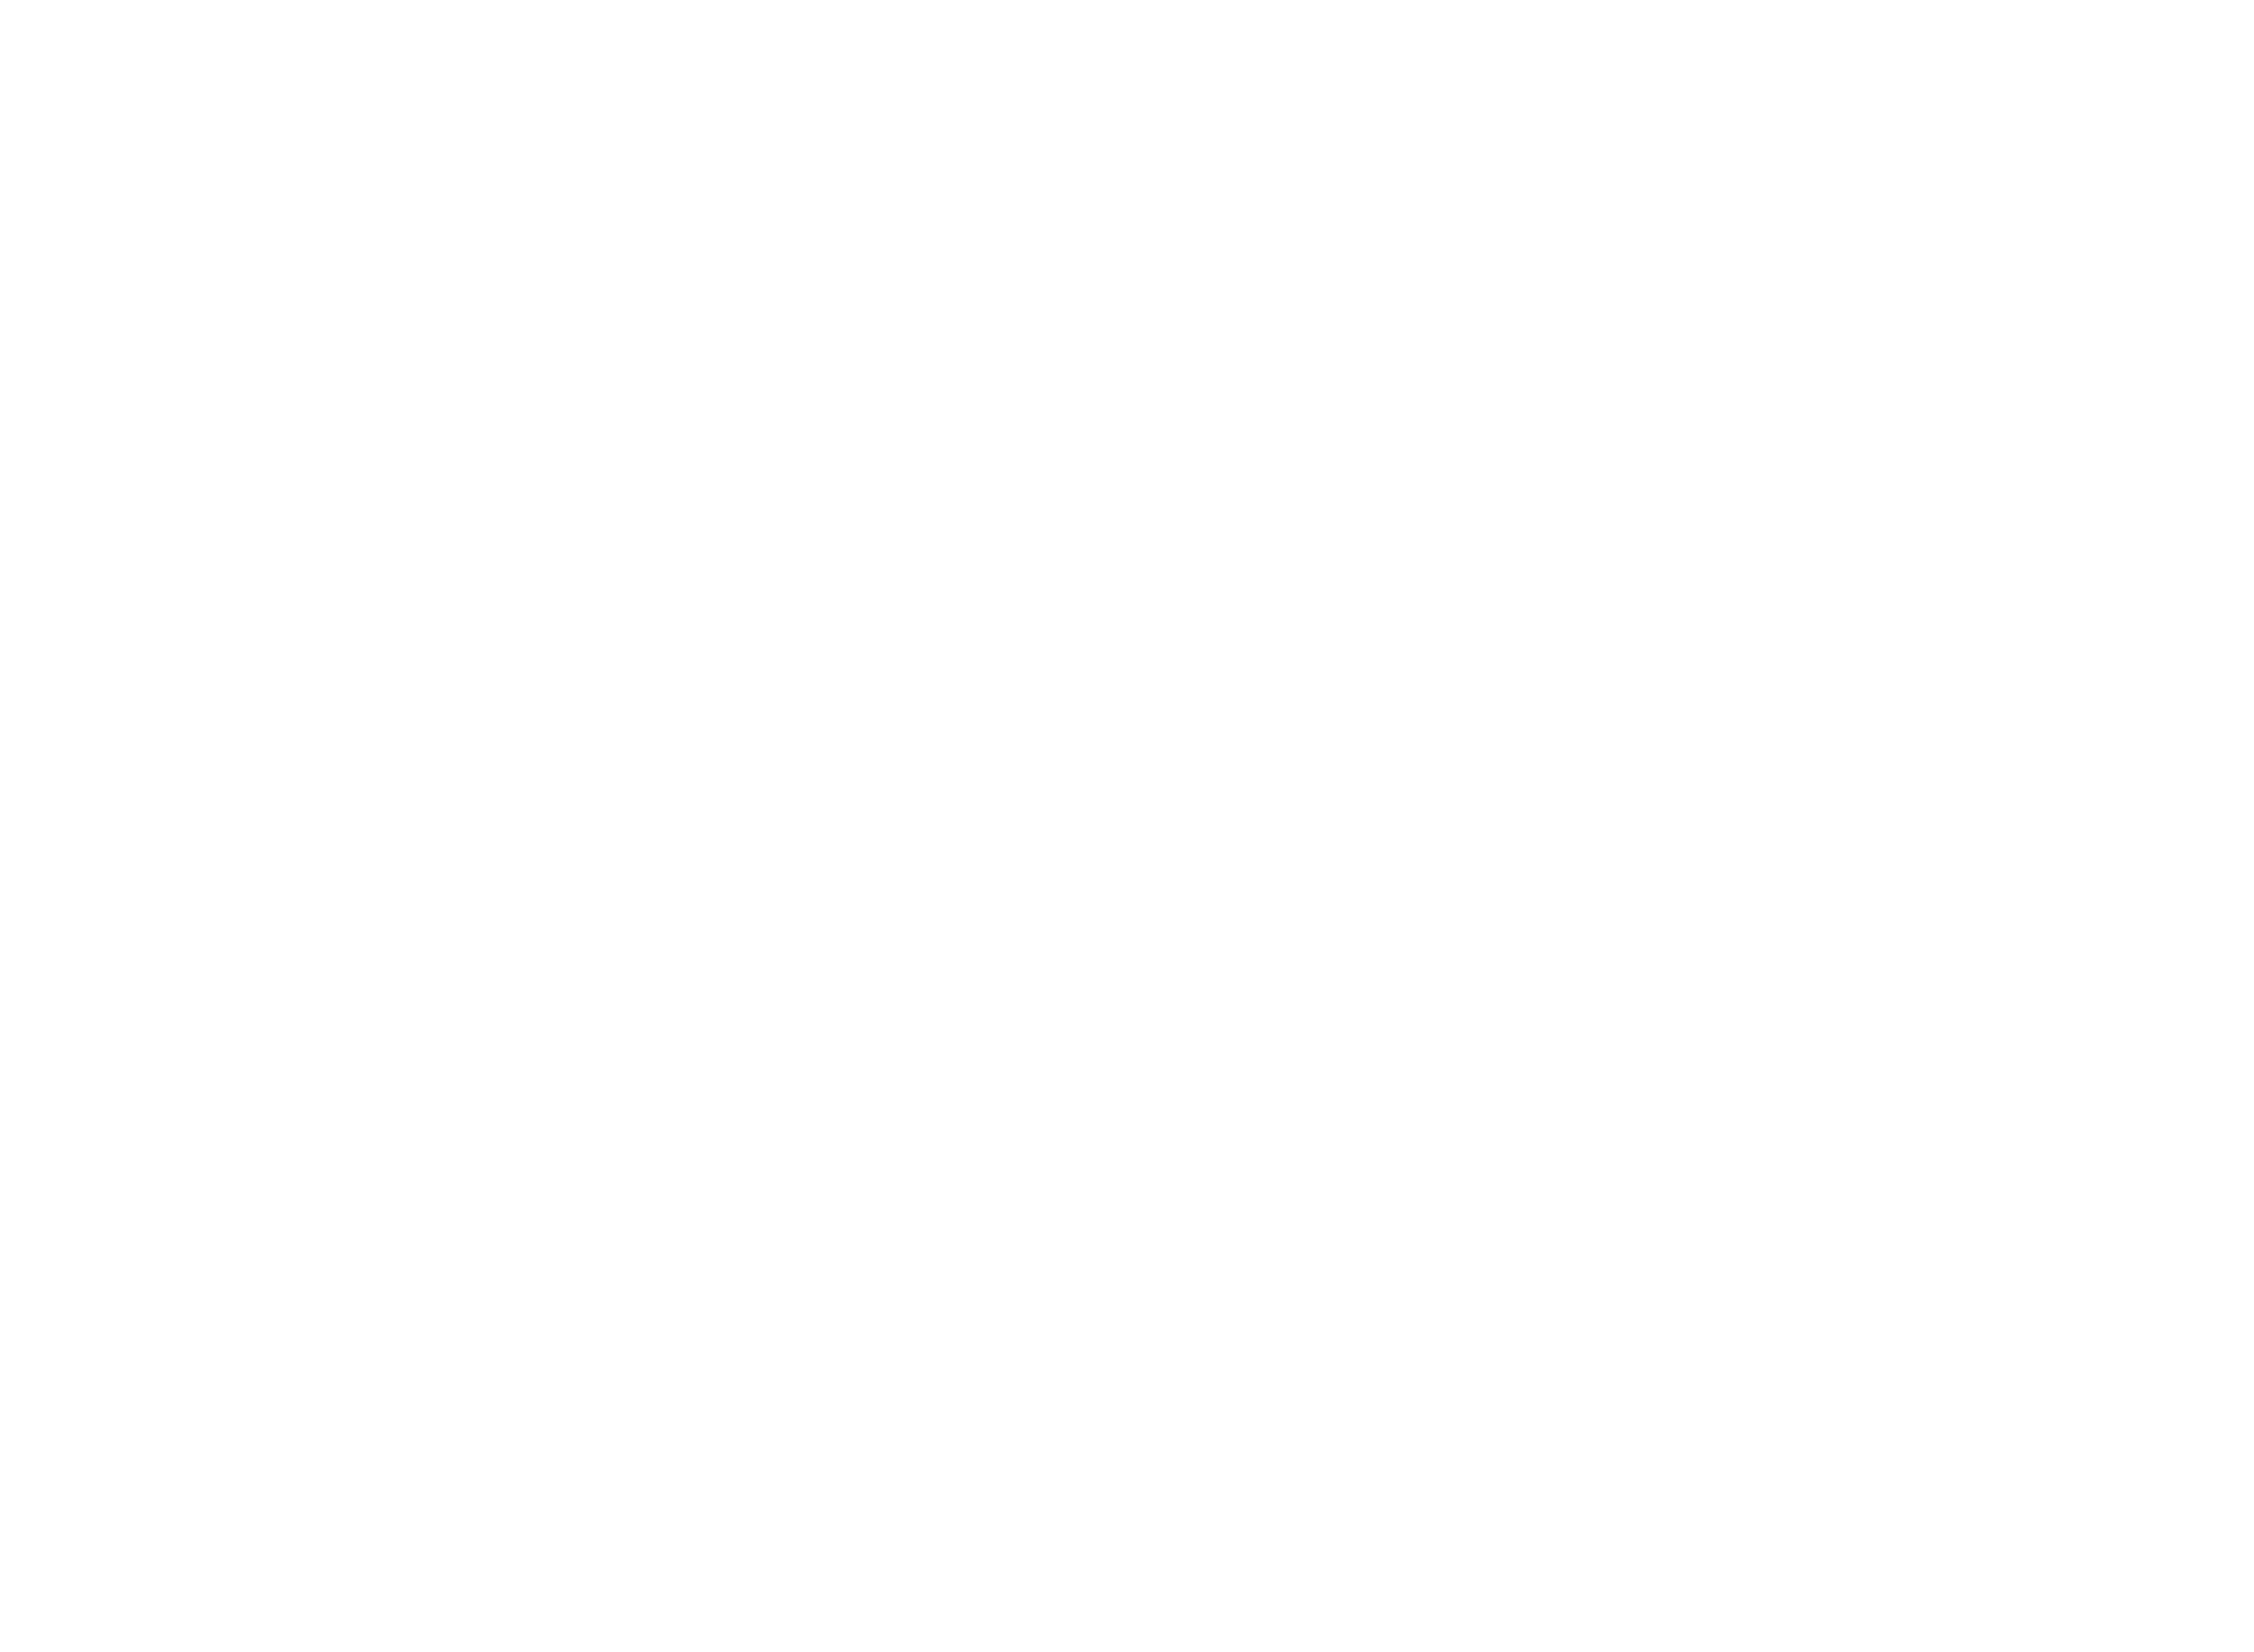 Old Time Bakery